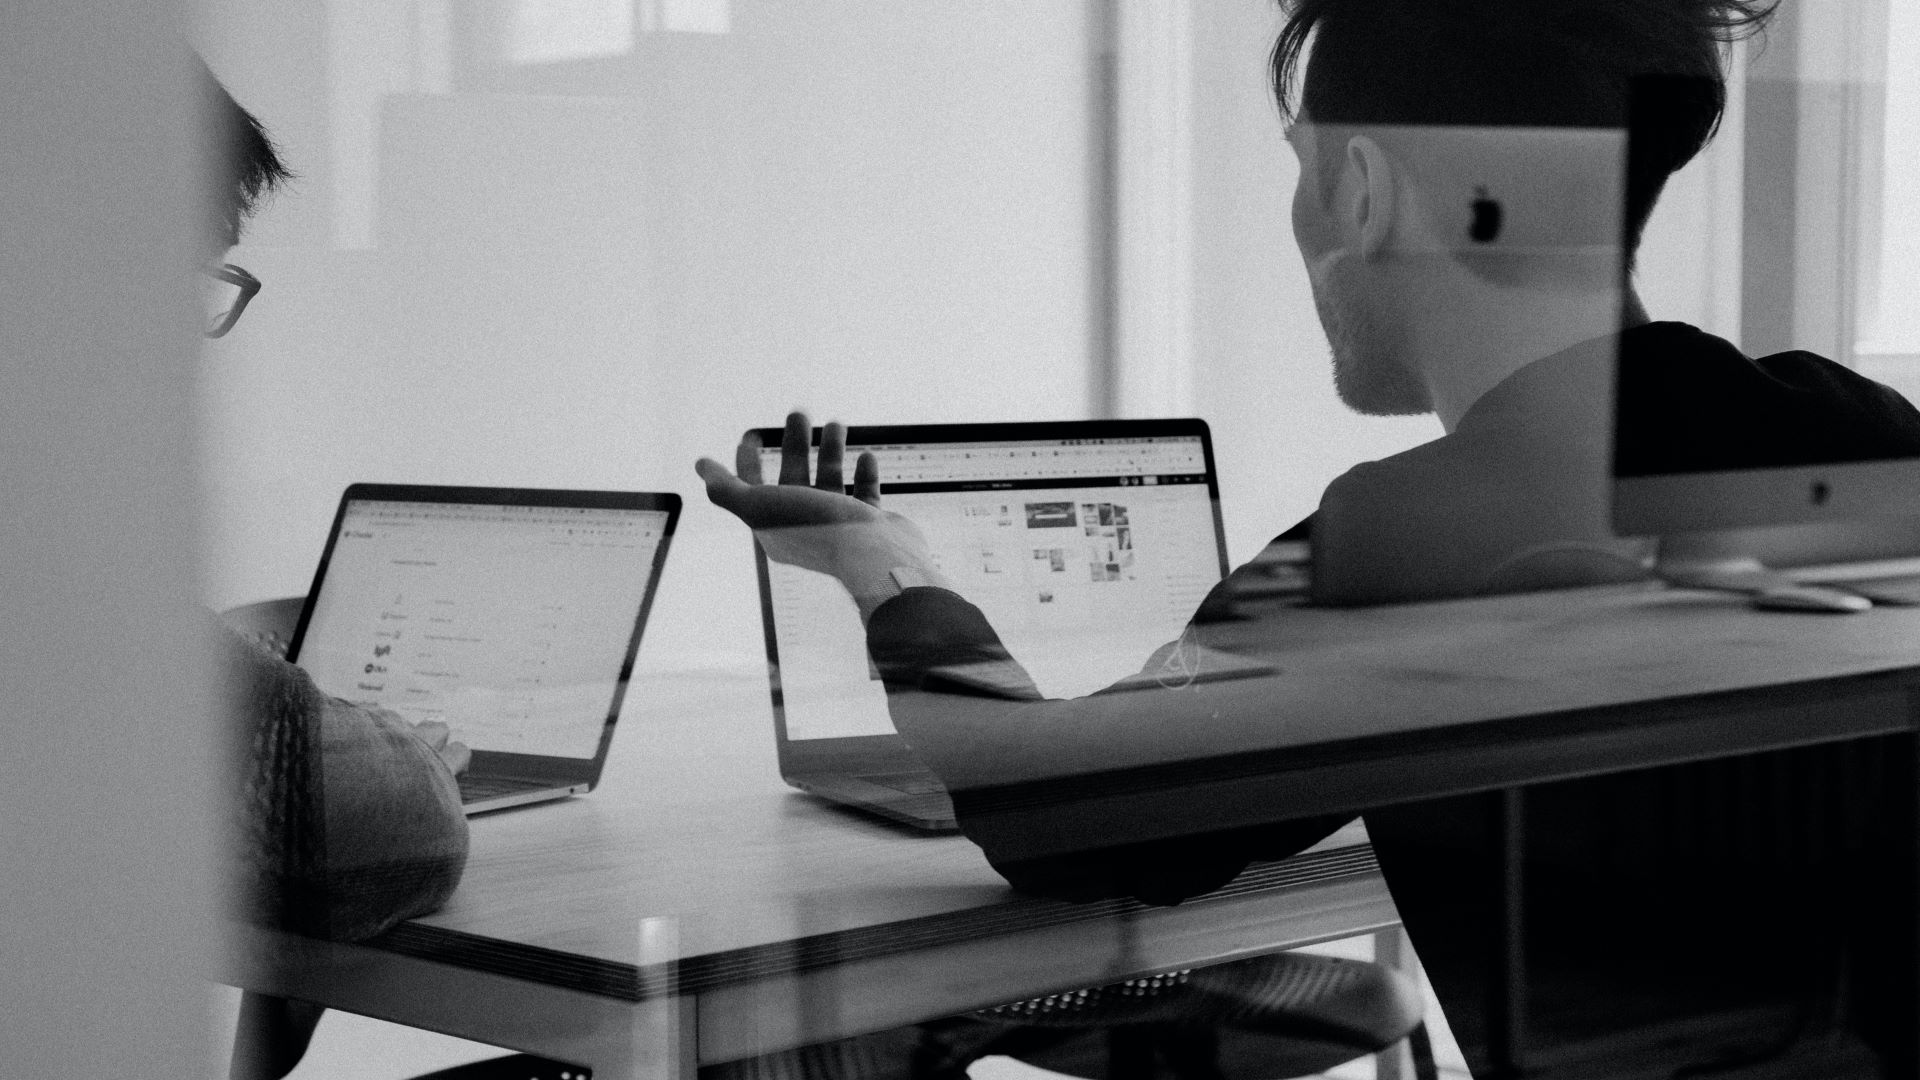 Two people in an office using laptops. The photo is black and white.